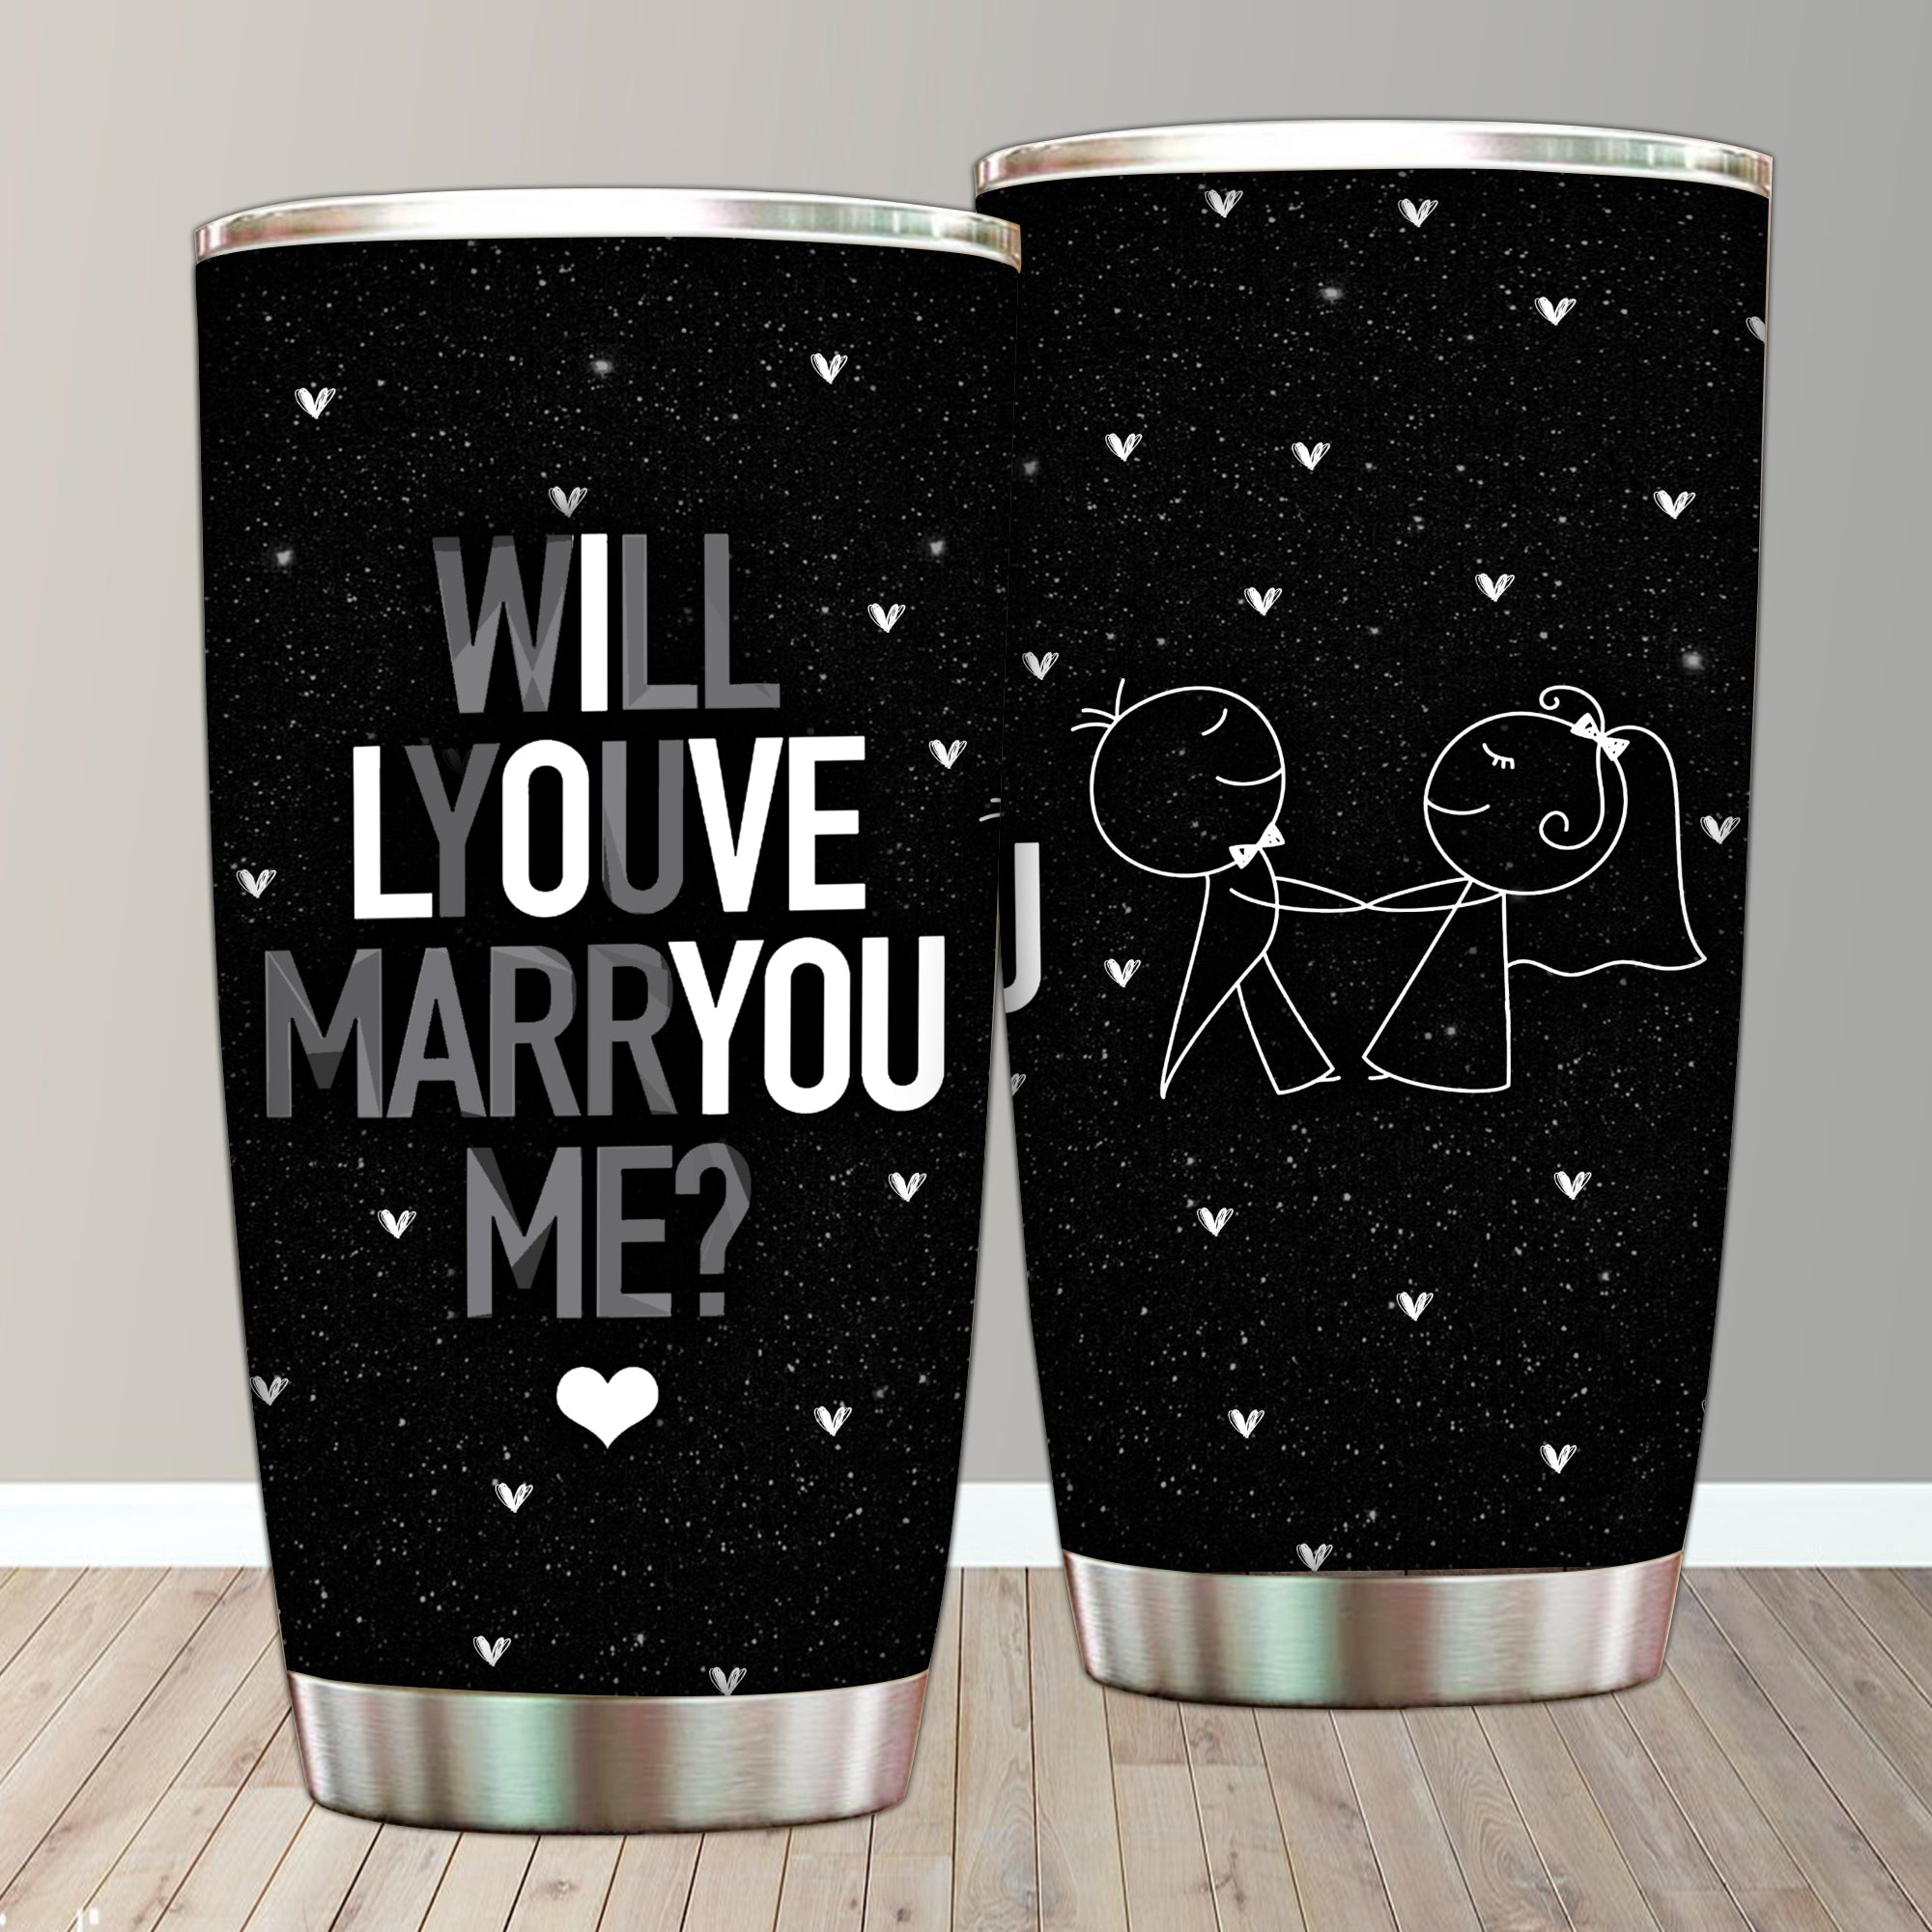 I love you, will you marry me? Tumbler